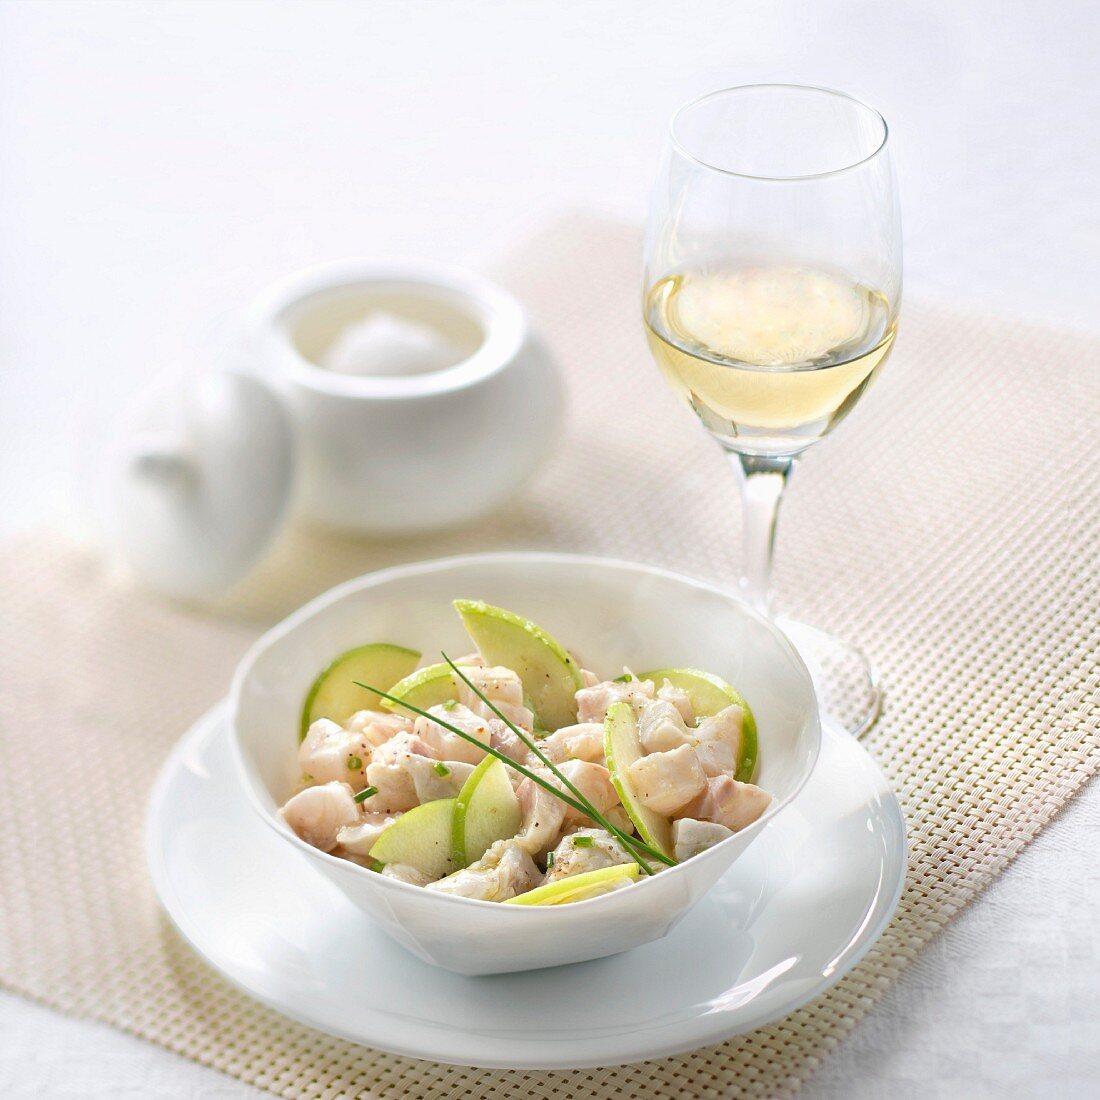 Sea bass tartar with Granny Smith apple, glass of fruity white wine